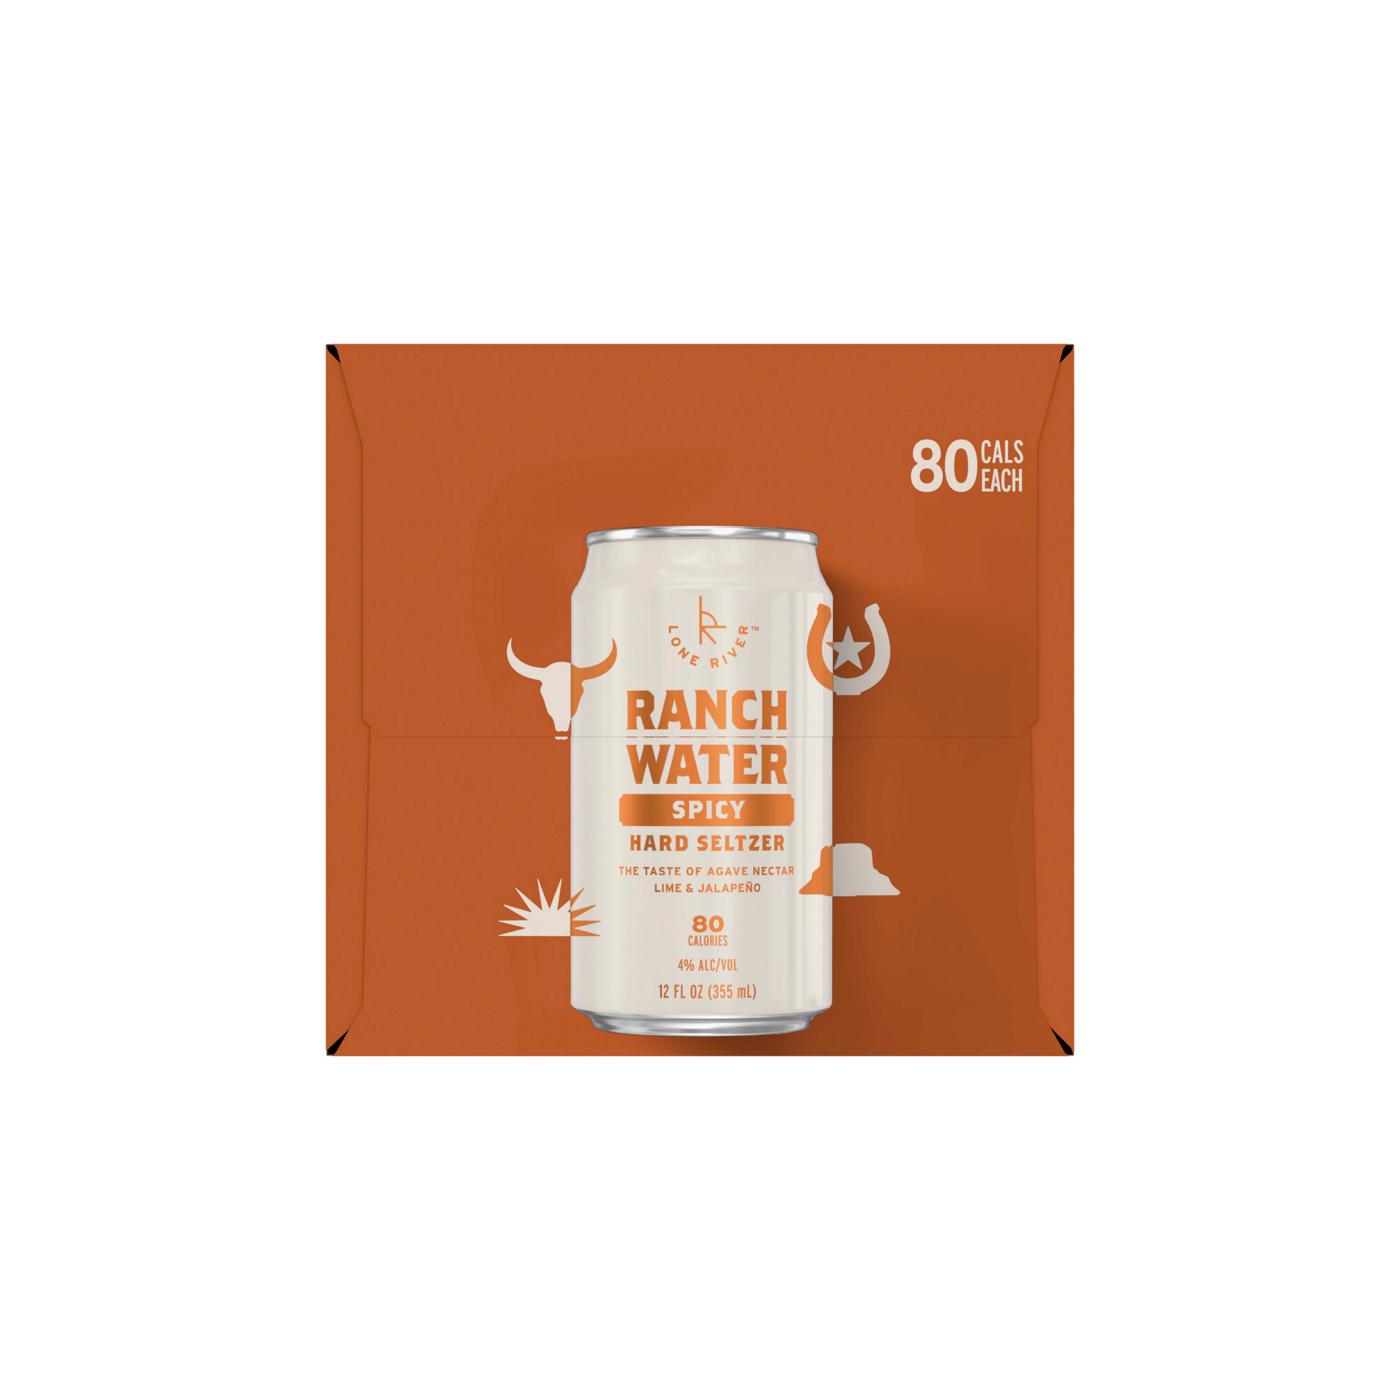 Lone River Ranch Water Spicy Hard Seltzer 12 oz Cans; image 2 of 3